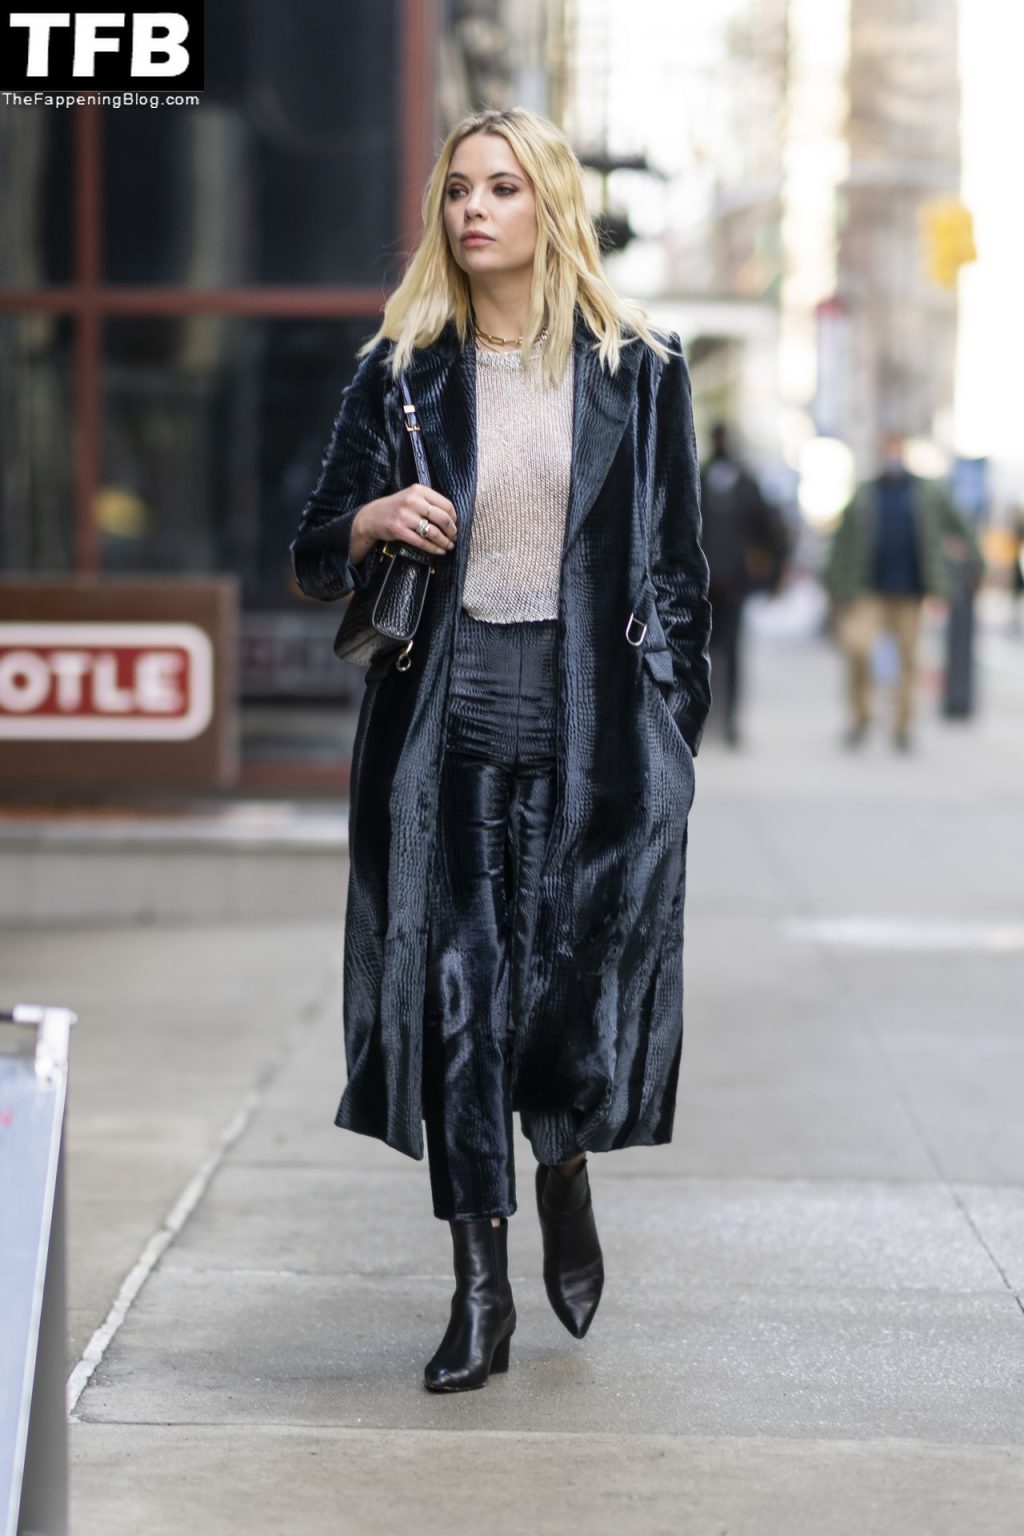 Ashley Benson Sexy The Fappening Blog 11 1024x1536 - Braless Ashley Benson Looks Stylish While Heading to a Meeting in NYC (20 Photos)